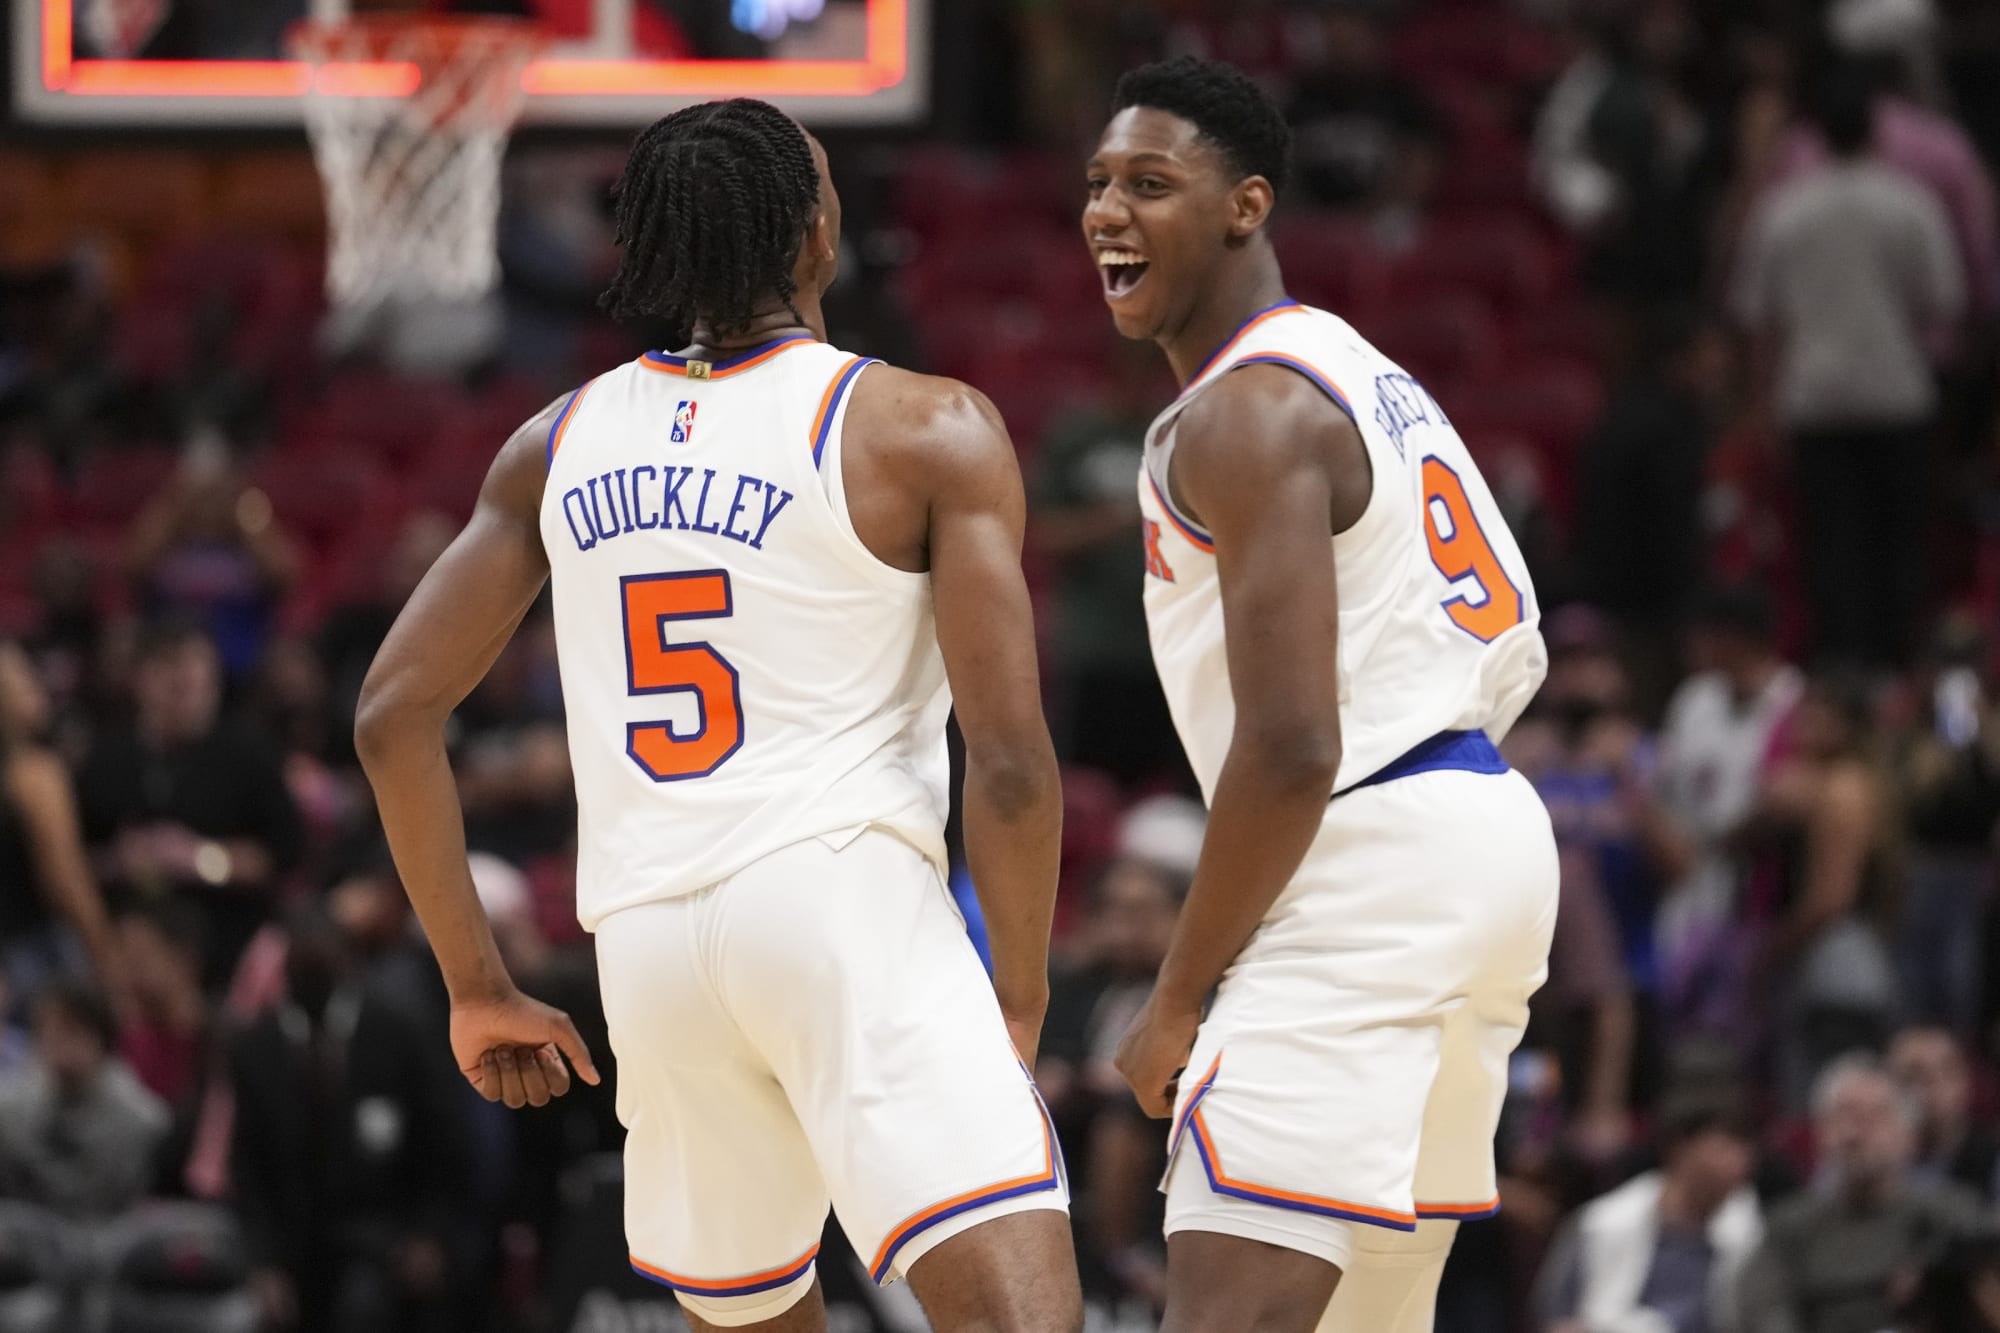 New York Knicks preview: Predictions and analysis for the 2022-23